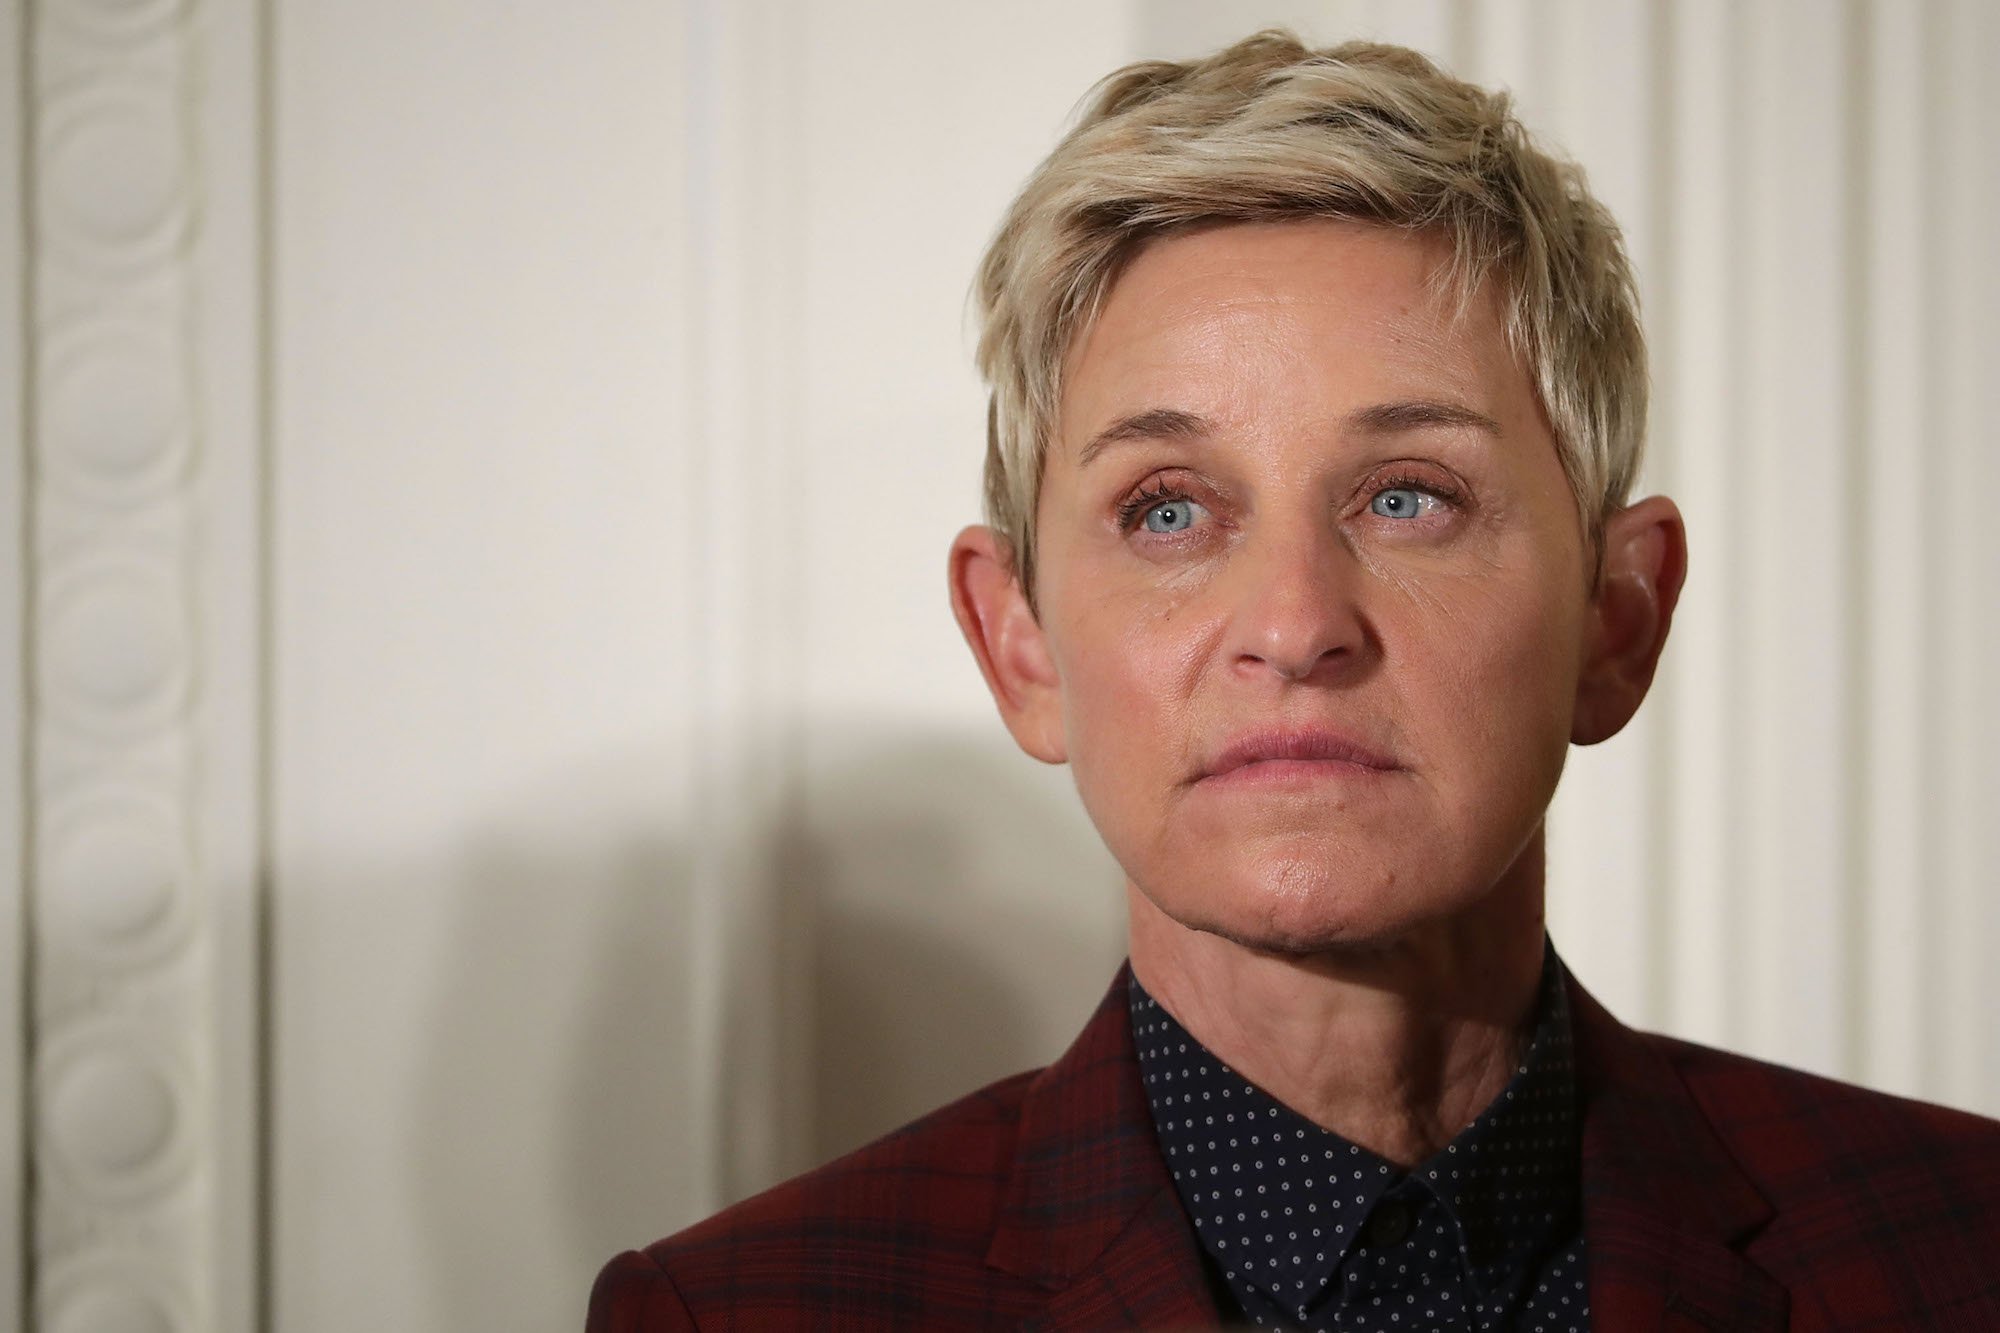 Ellen DeGeneres in front of a white wall not smiling